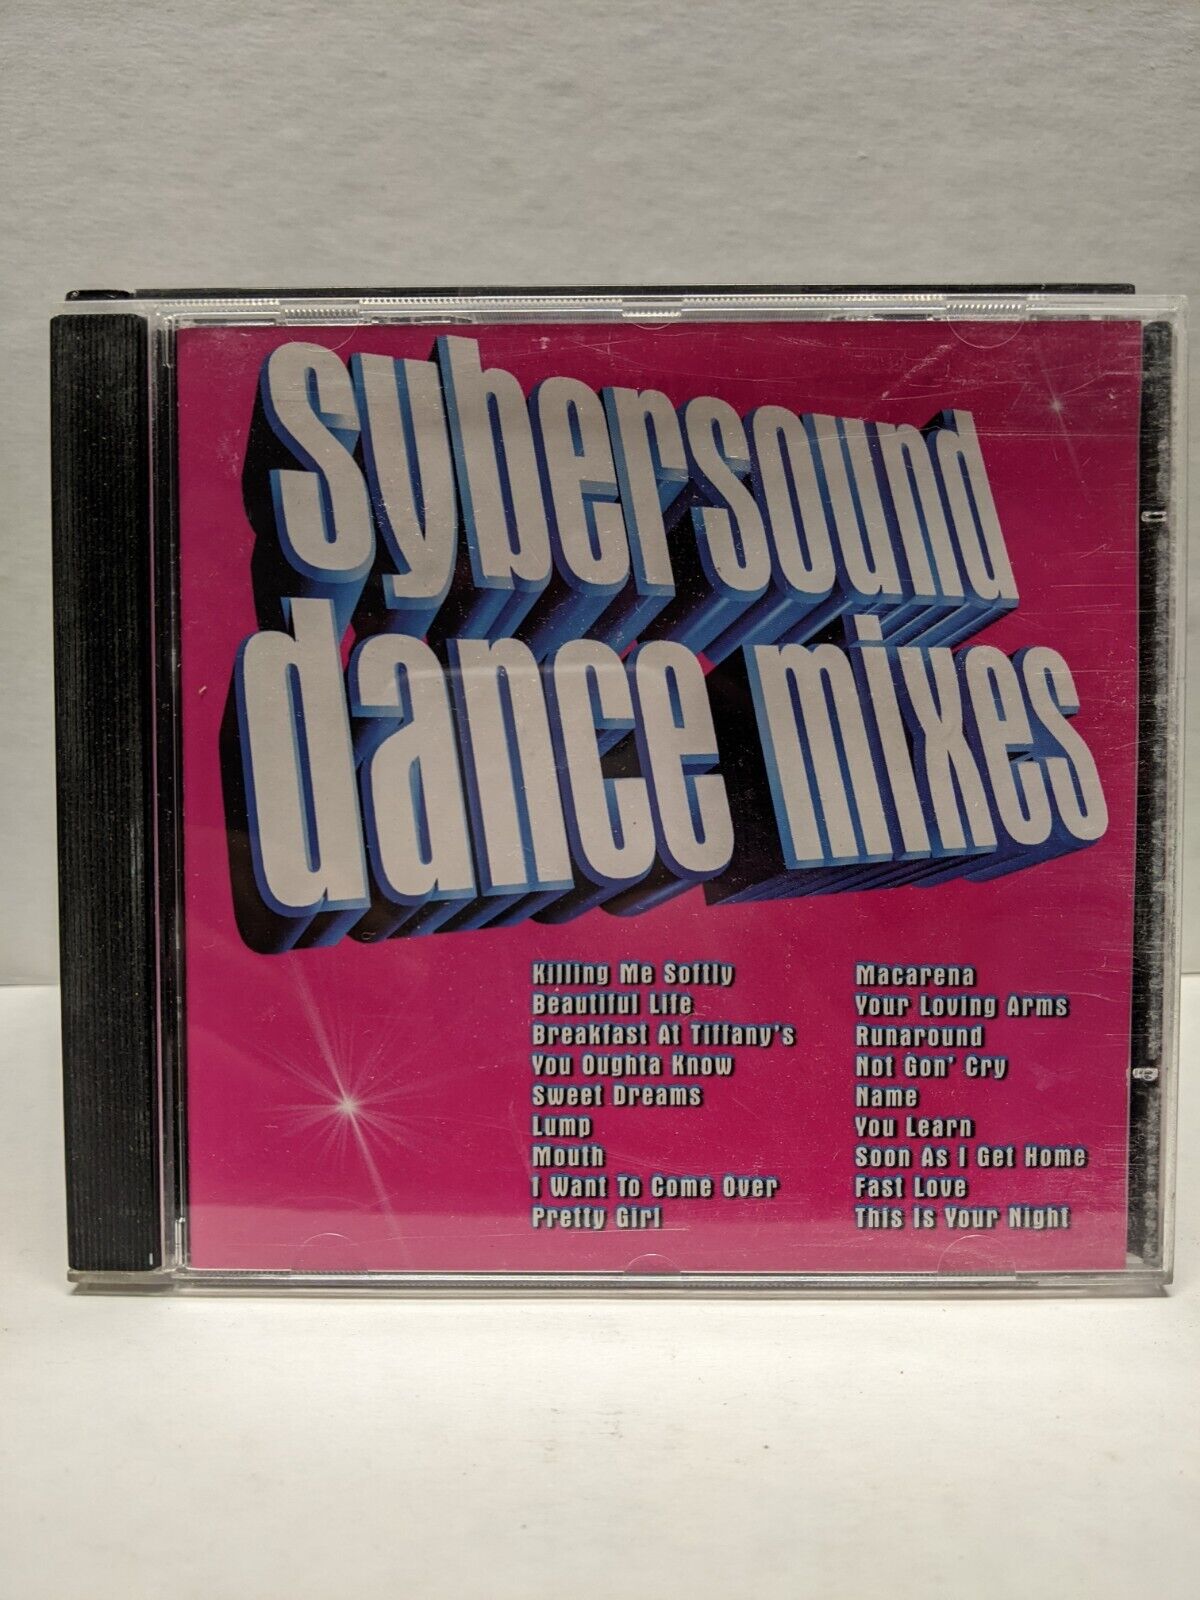 Dance Mixes 1, Sybersound - (Compact Disc)